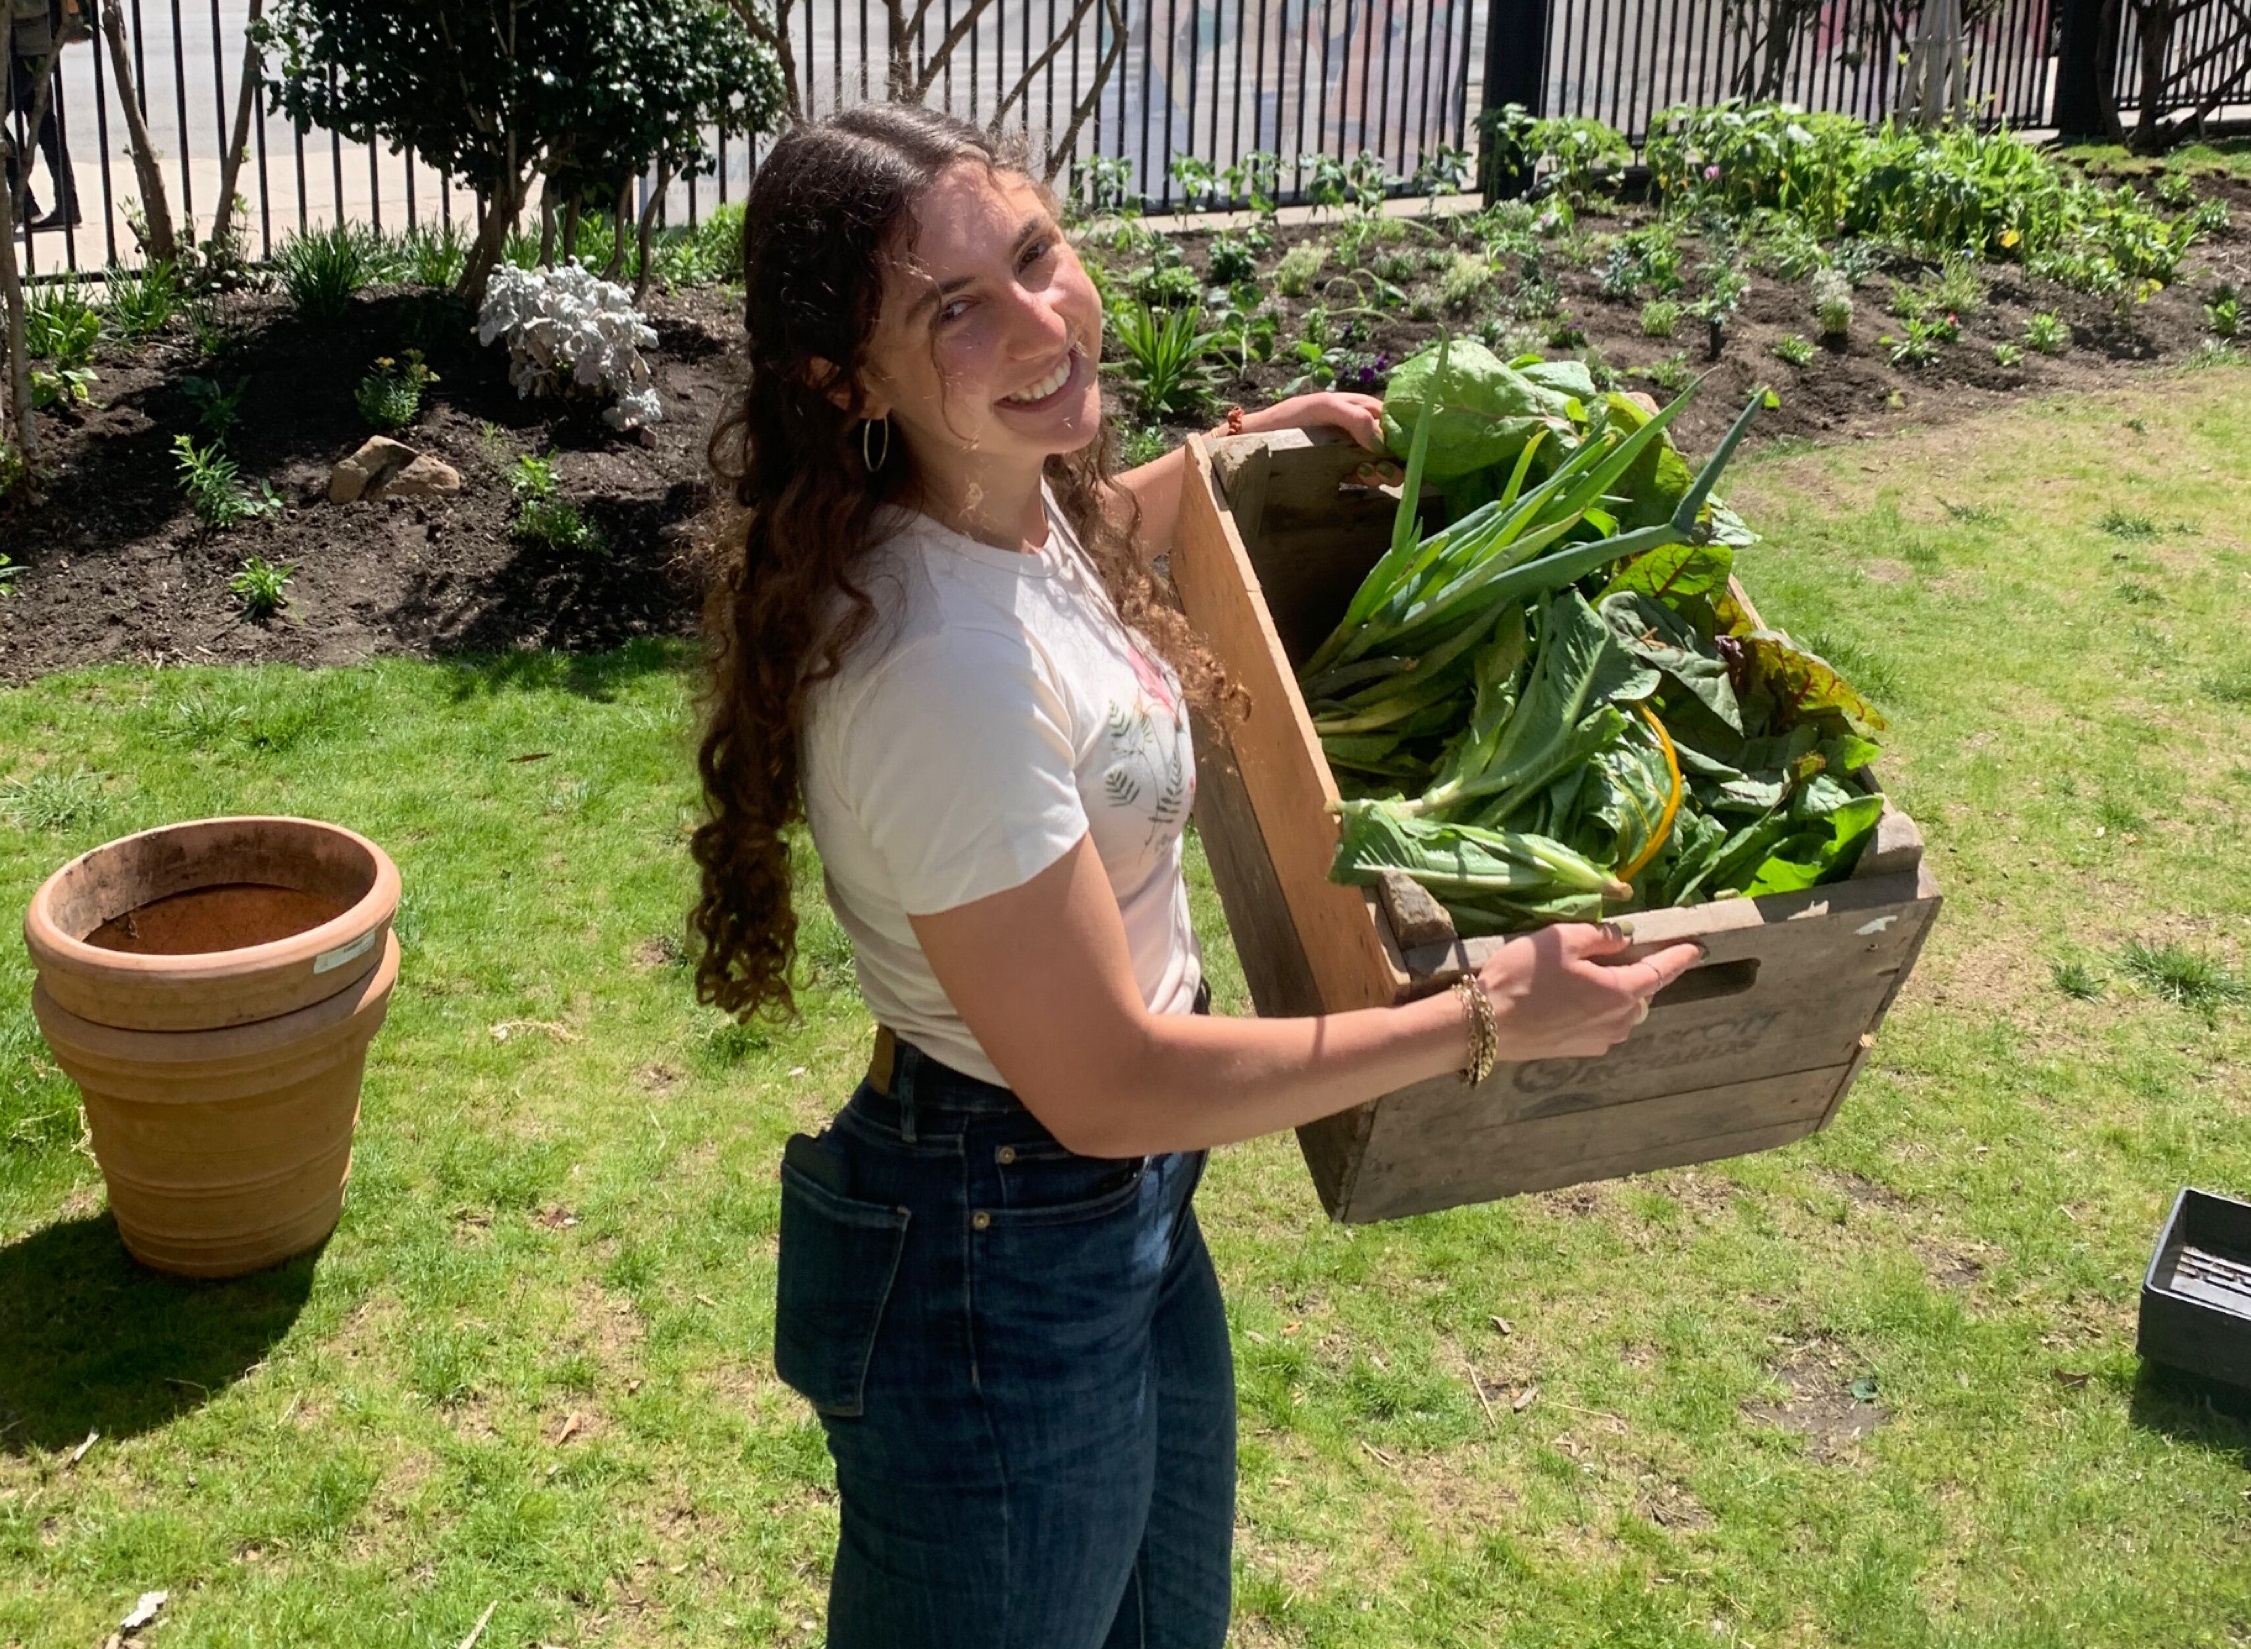 Delaney Michaelson '24 poses for a photo while holding a wooden crate full of fresh greens